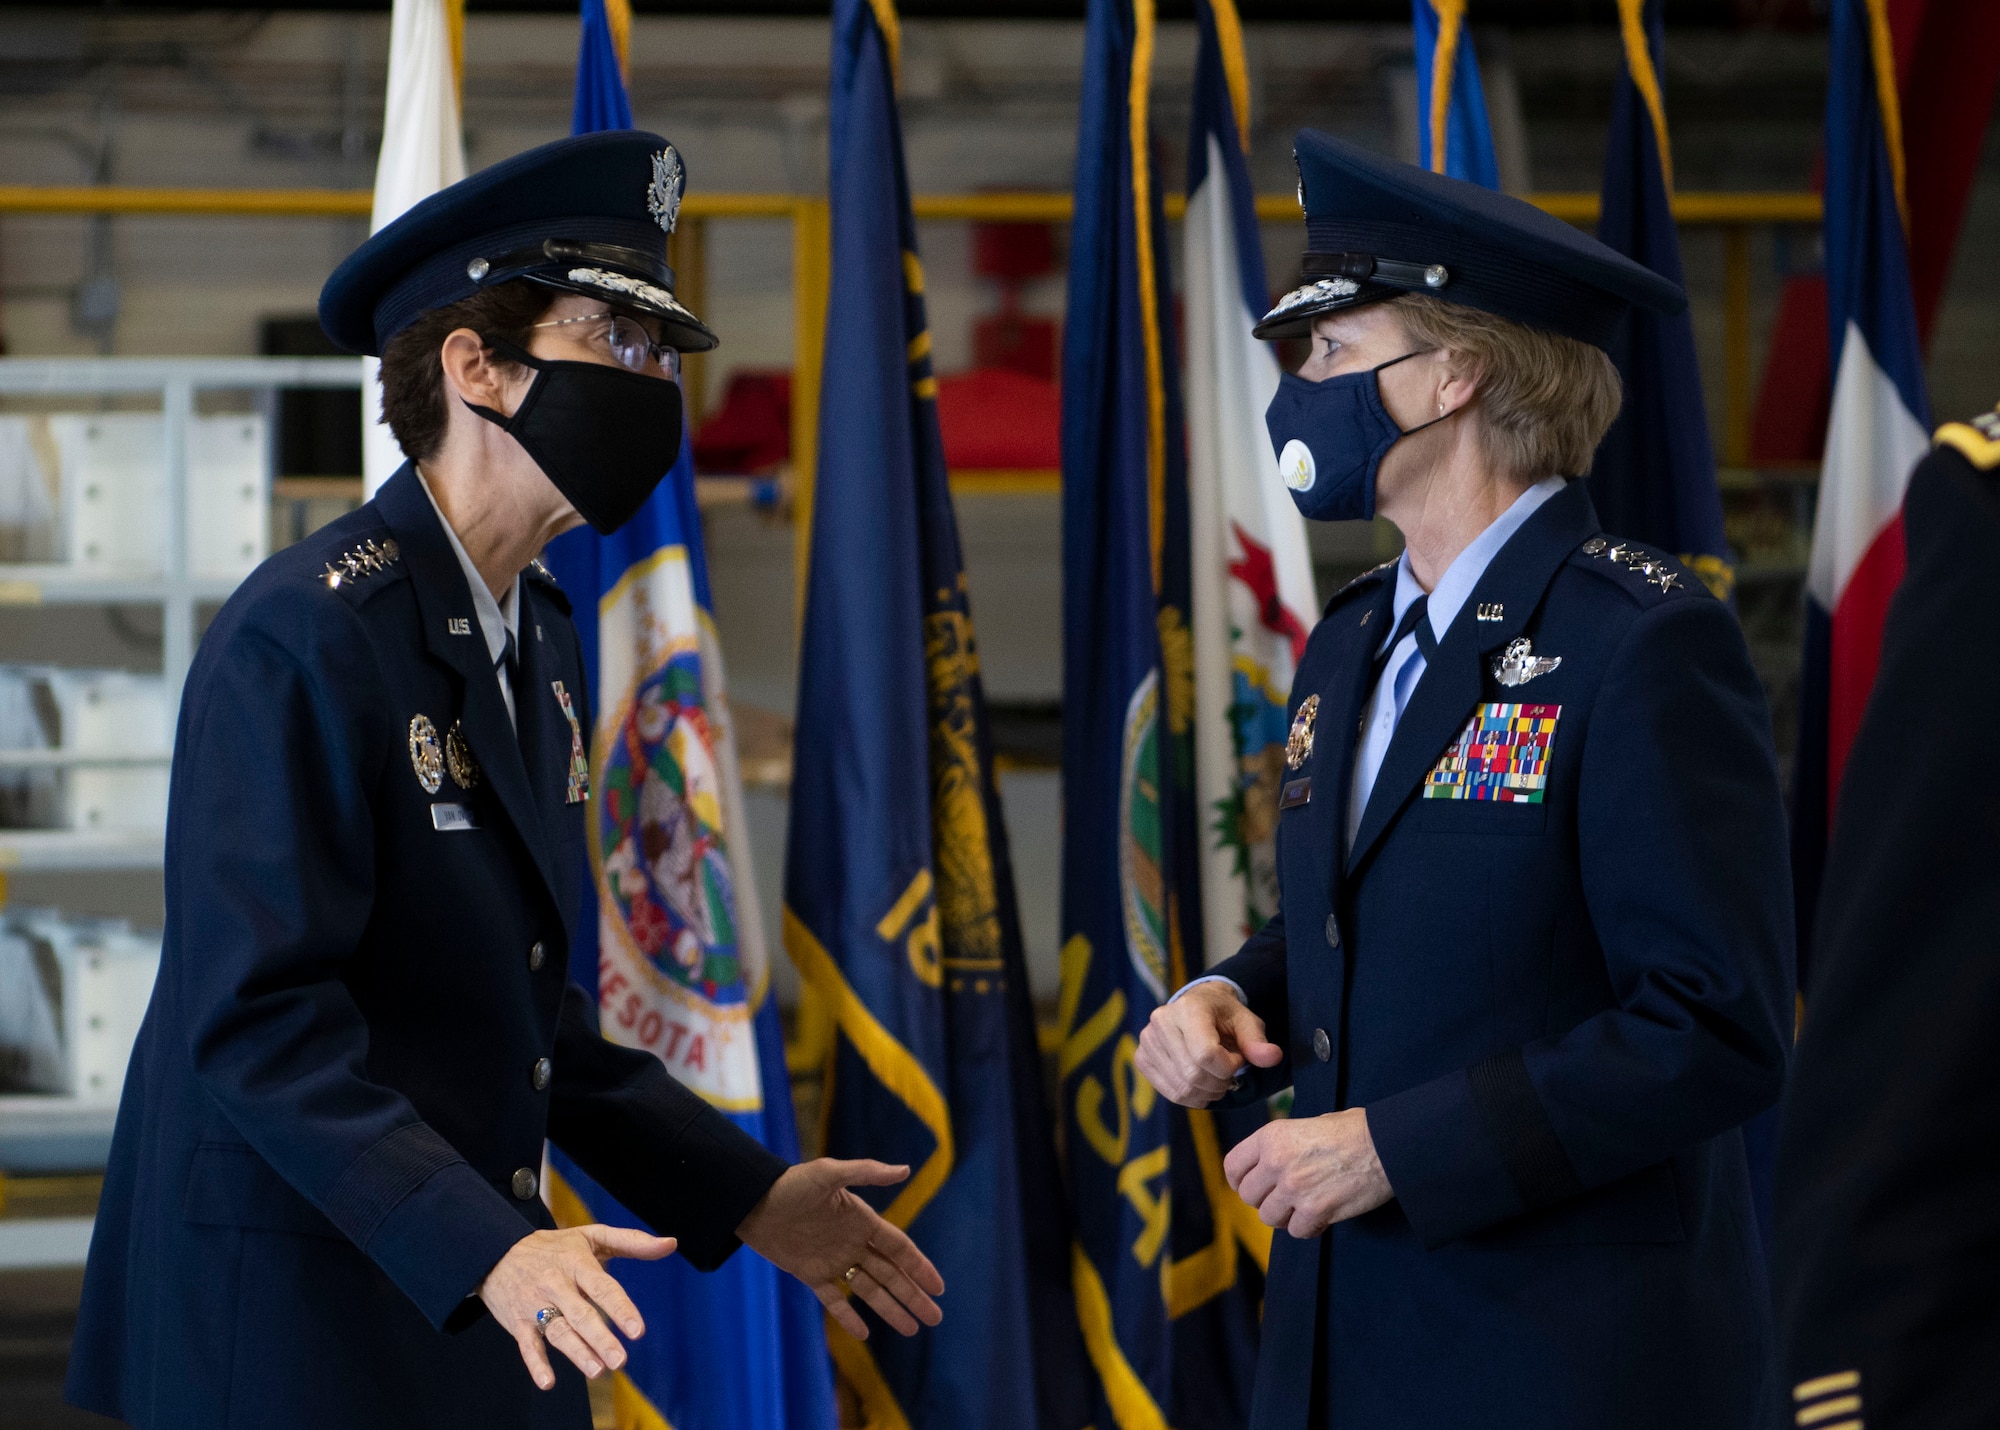 Gen. Jacqueline D. Van Ovost, incoming commander of Air Mobility Command, and Gen. Maryanne Miller, AMC commander, talk before the AMC change of command ceremony at Scott Air Force Base, Illinois, Aug. 20, 2020. Van Ovost will lead Airmen who provide airlift, aerial refueling, special air mission, aeromedical evacuation and mobility support. (U.S. Air Force photo by Senior Airman Miranda Simpson)